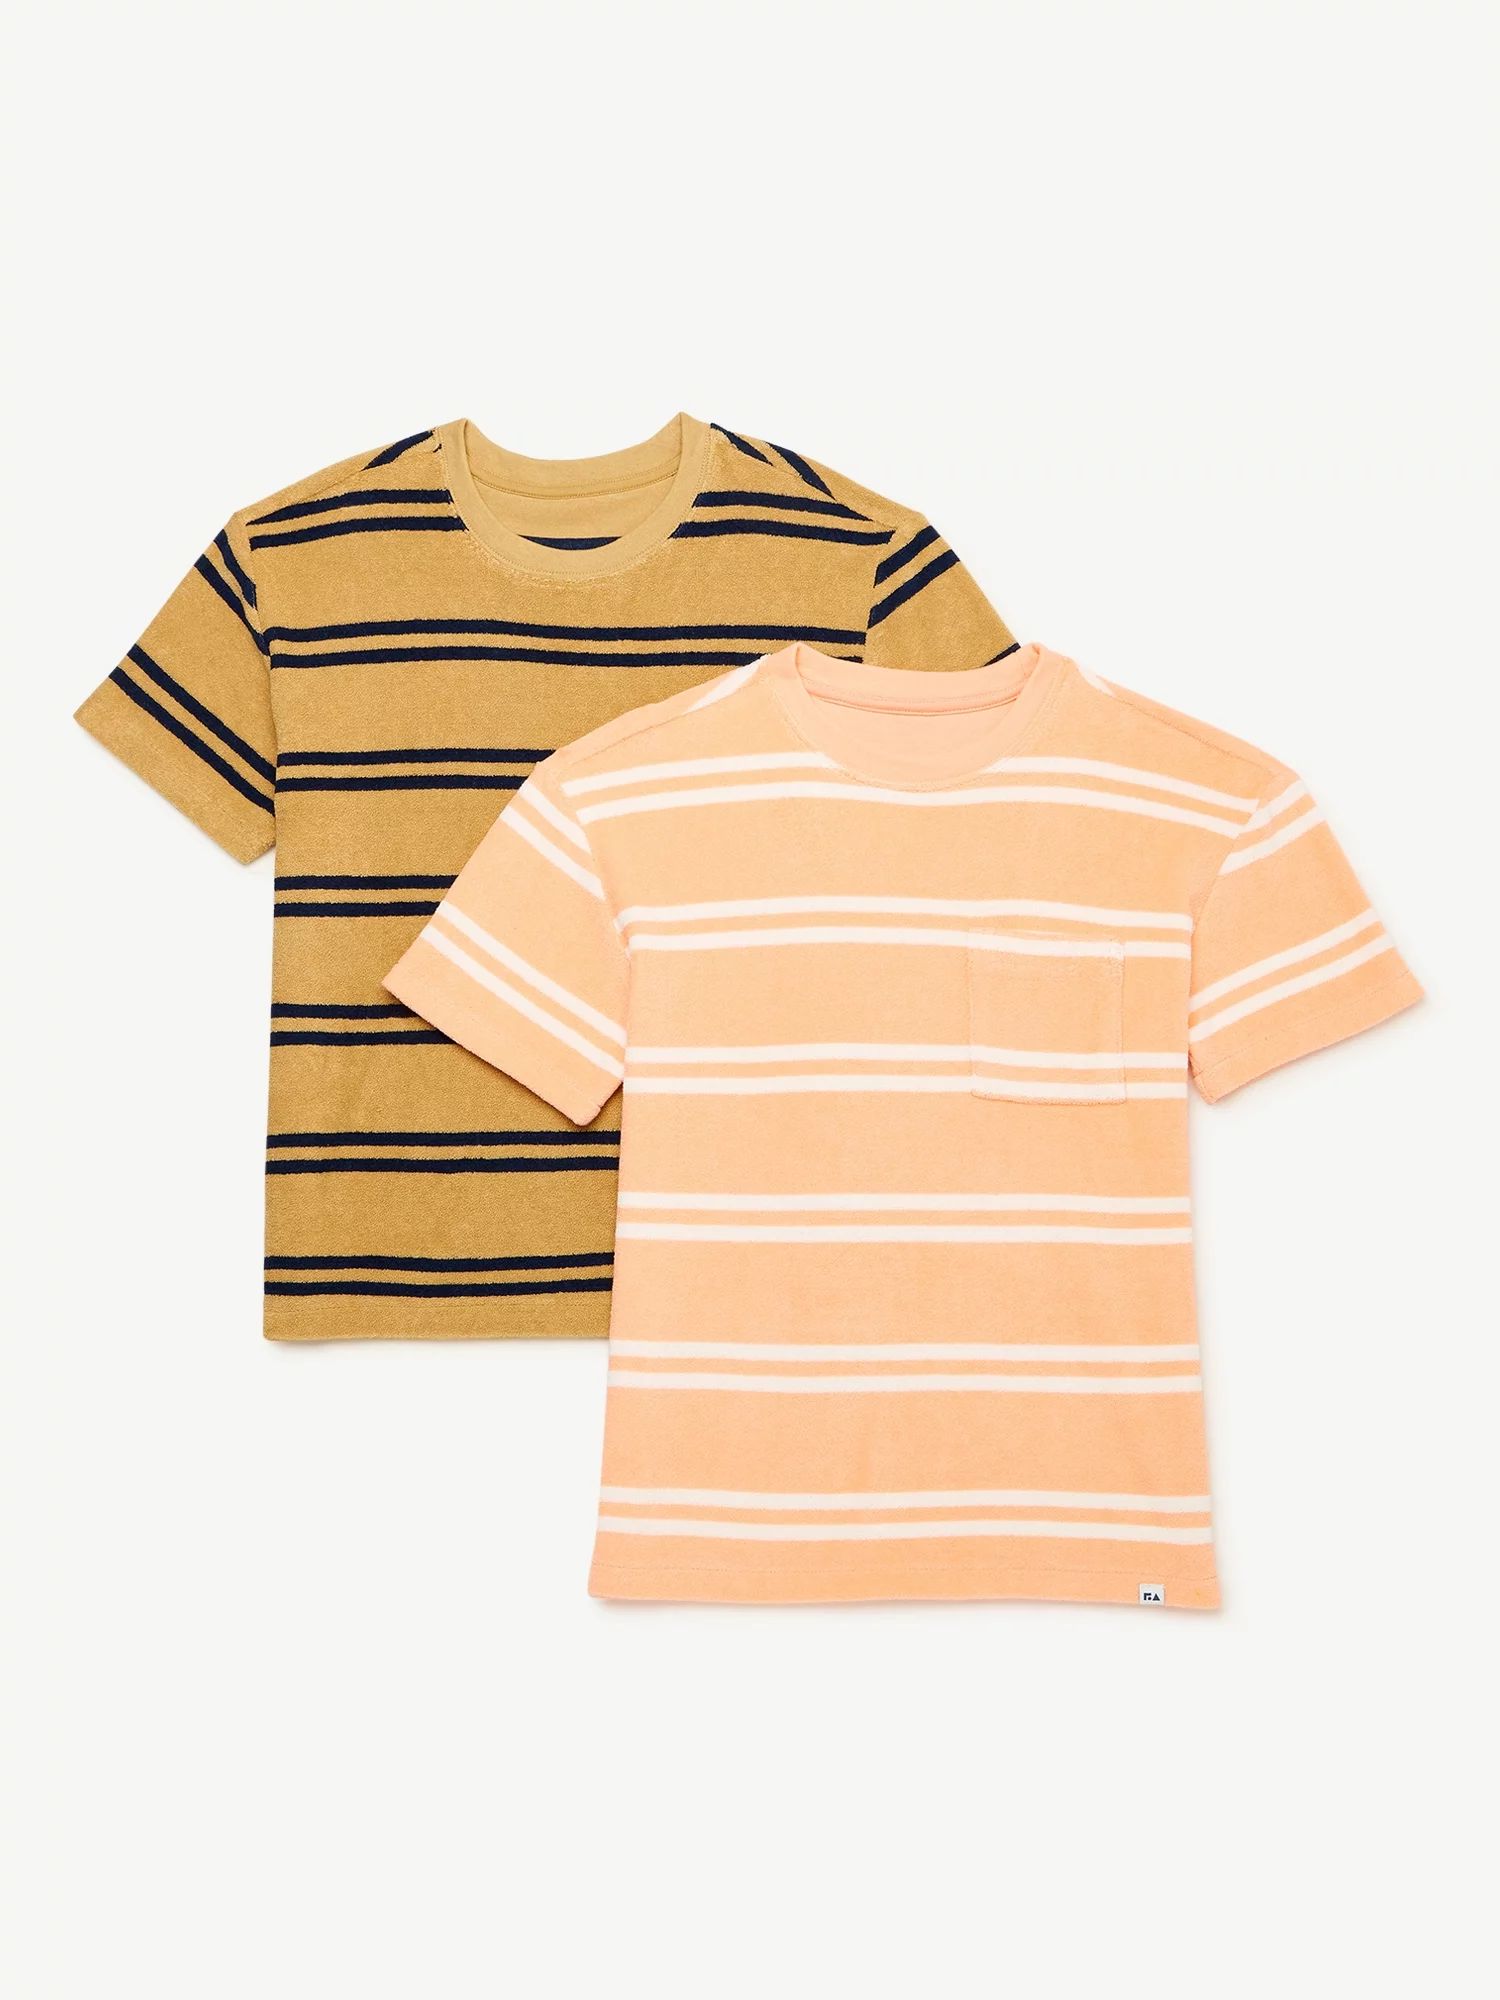 Free Assembly Boys Short Sleeve Terrycloth T-Shirt, 2-Pack, Sizes 4-18 | Walmart (US)